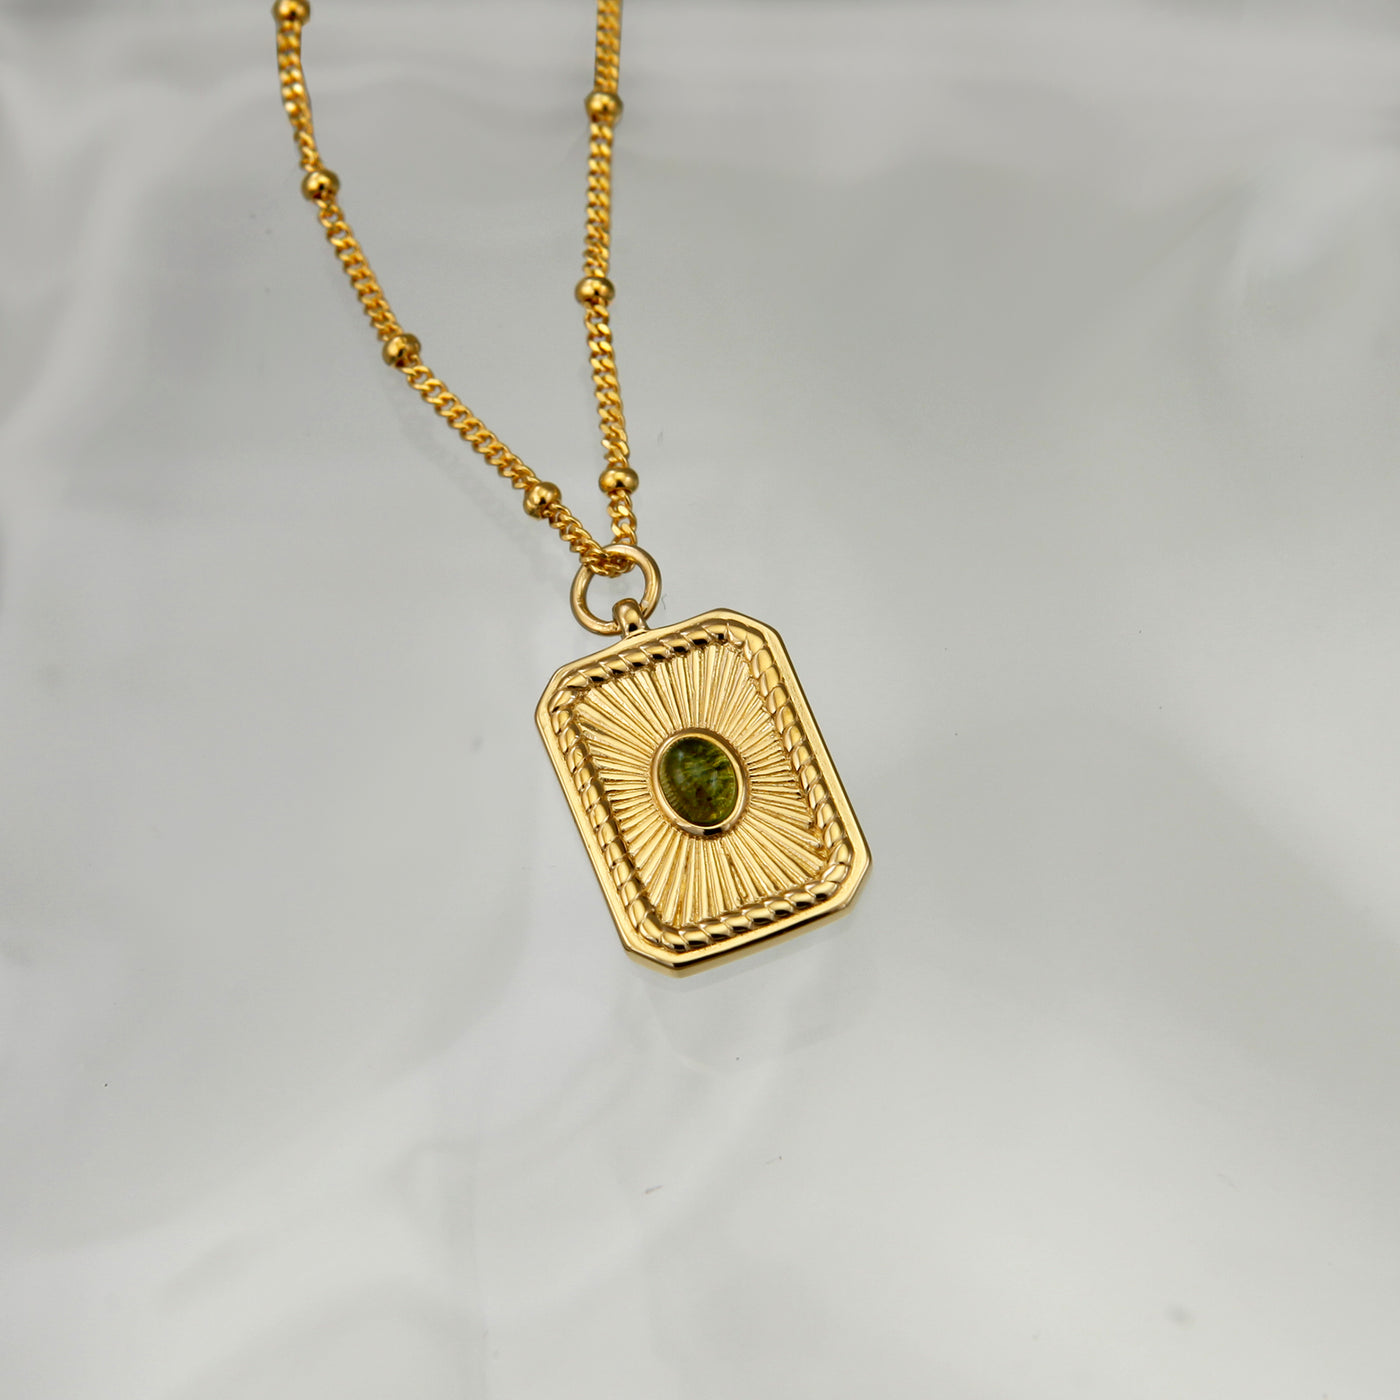 October Green Tourmaline Birthstone Necklace in Gold